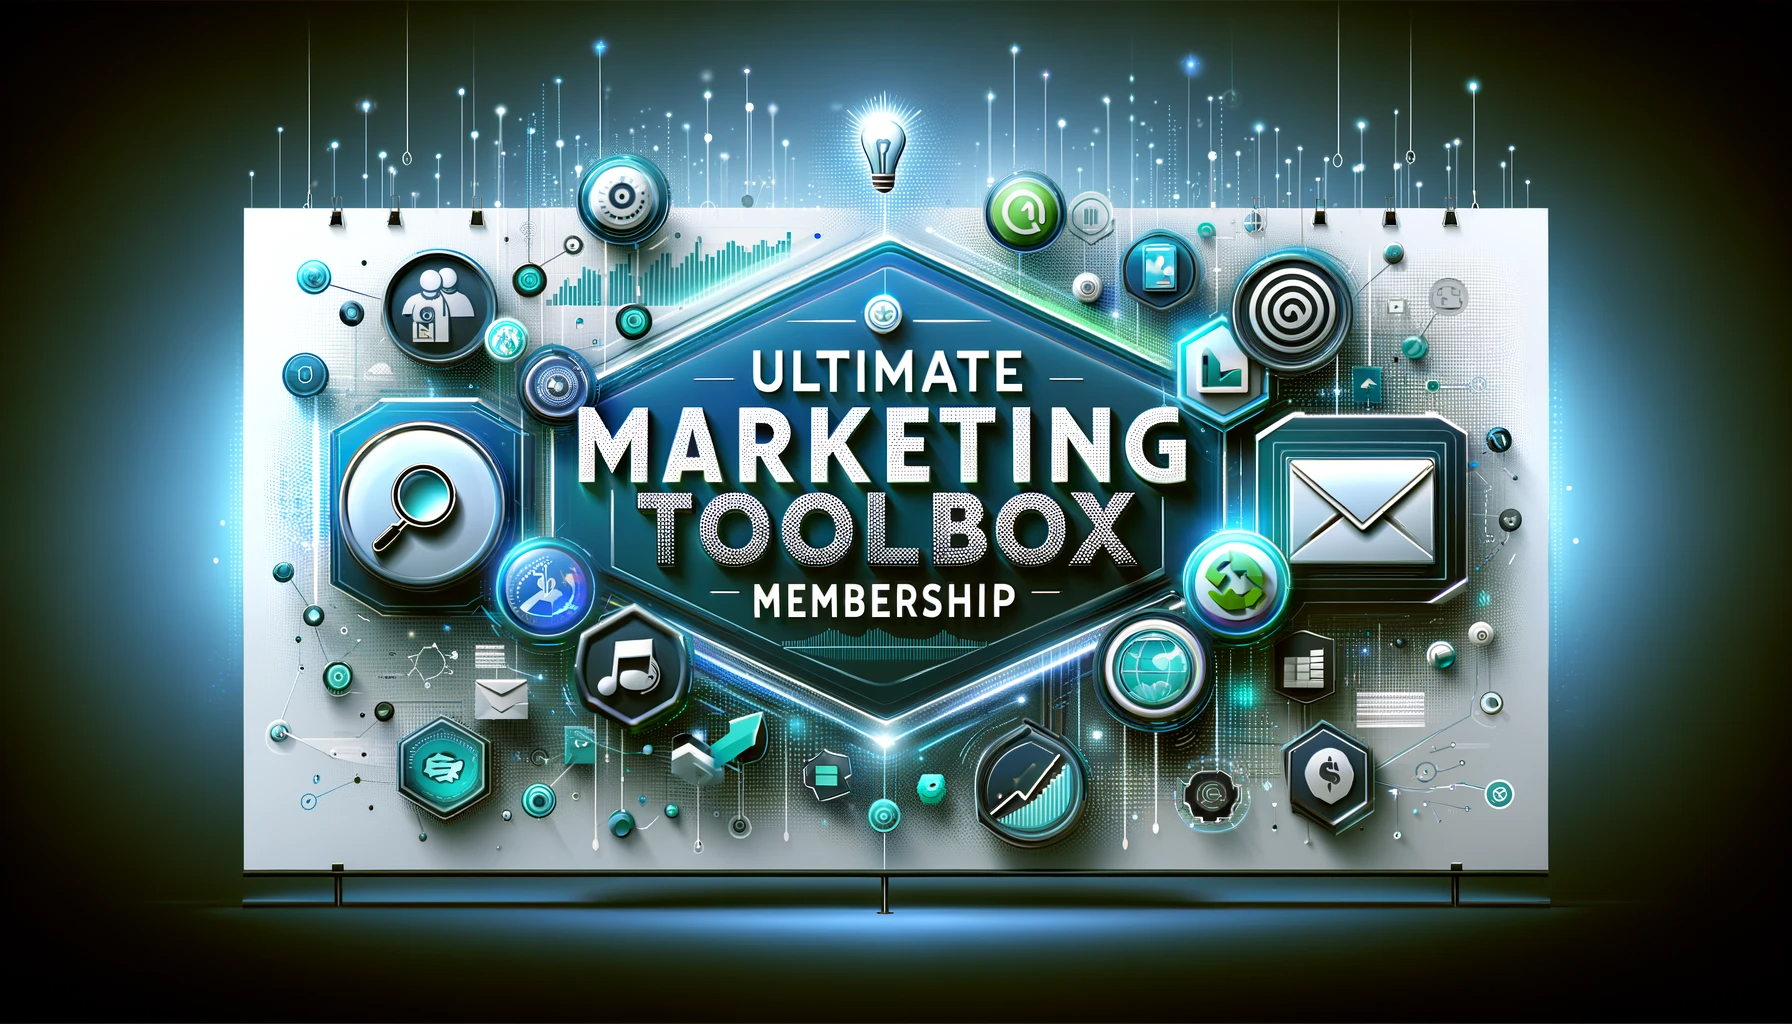 DALL·E 2024-01-01 18.13.13 - A professional and visually appealing banner for the Ultimate Marketing Toolbox Membership. The banner features a modern, digital look with a color 